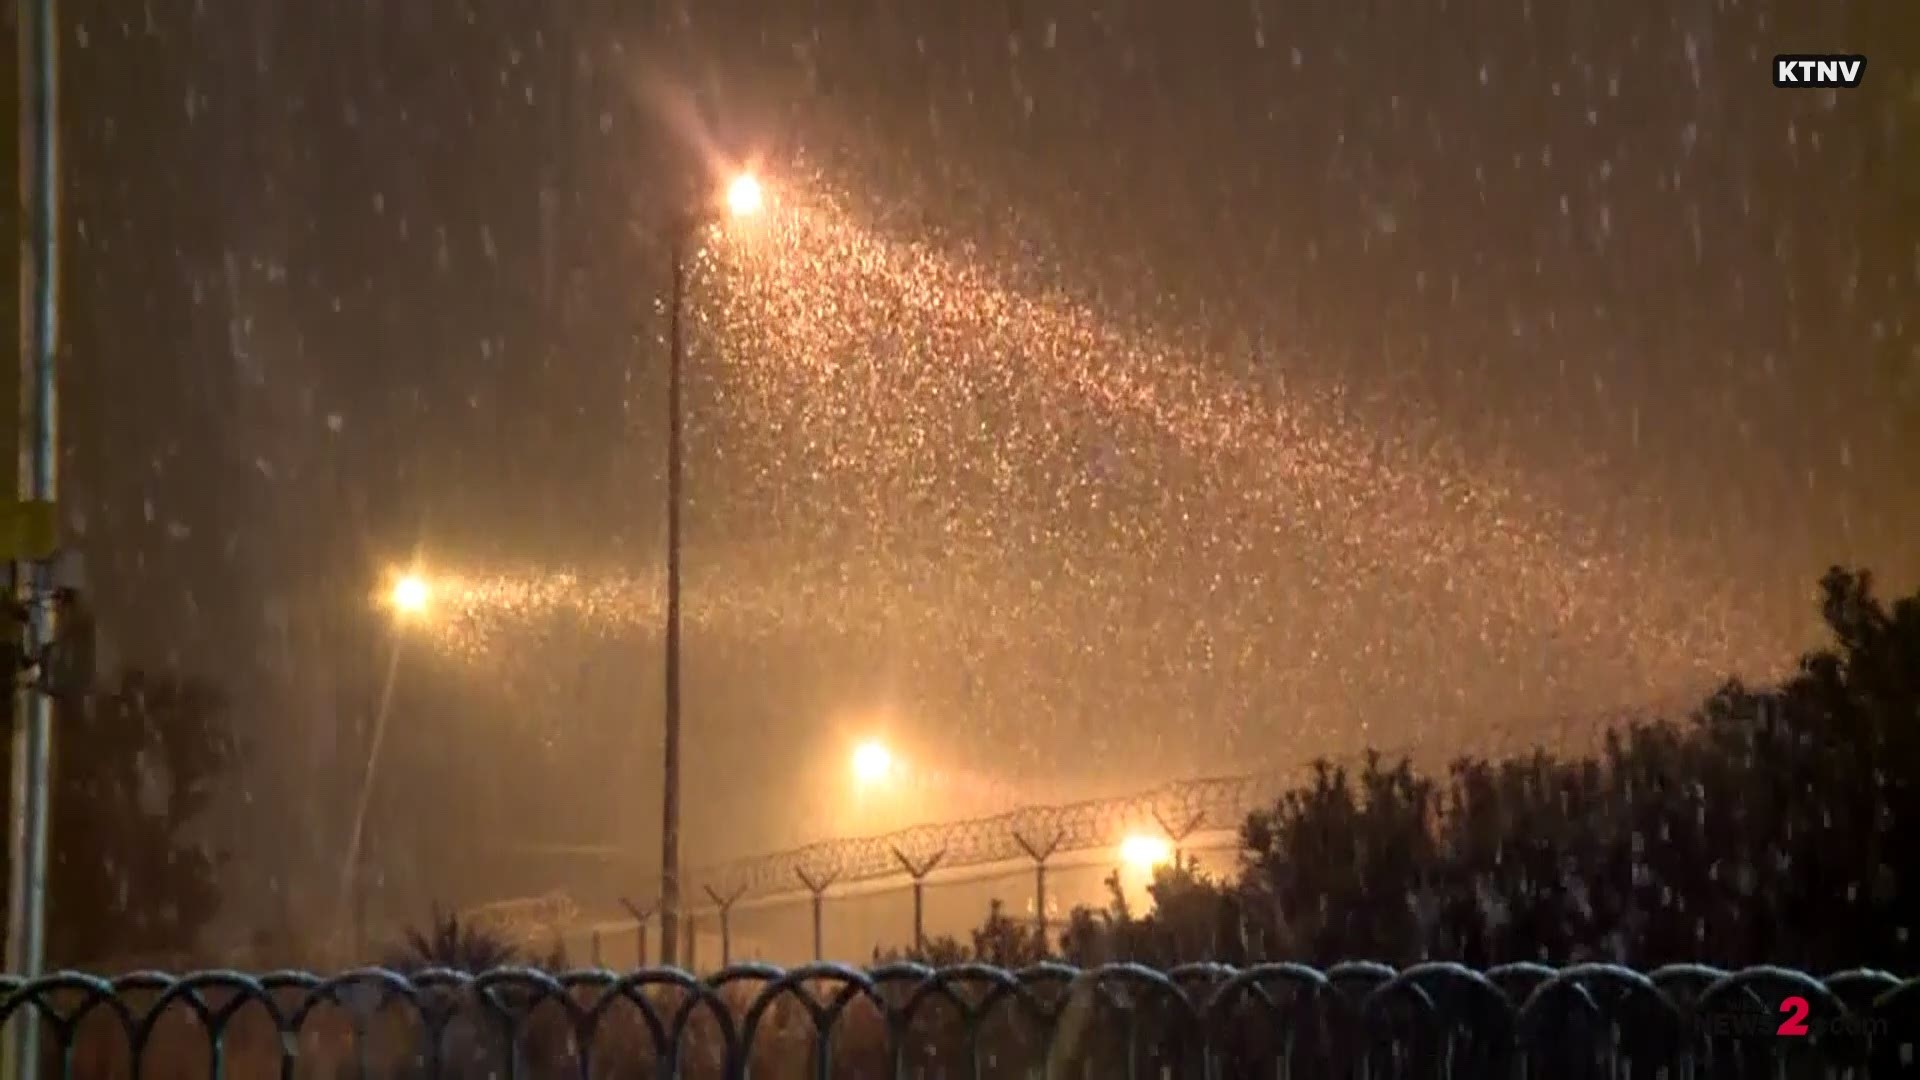 The Vegas lights are always brighter when it snows! Check it out the rare snowfall made for a good time in Las Vegas.